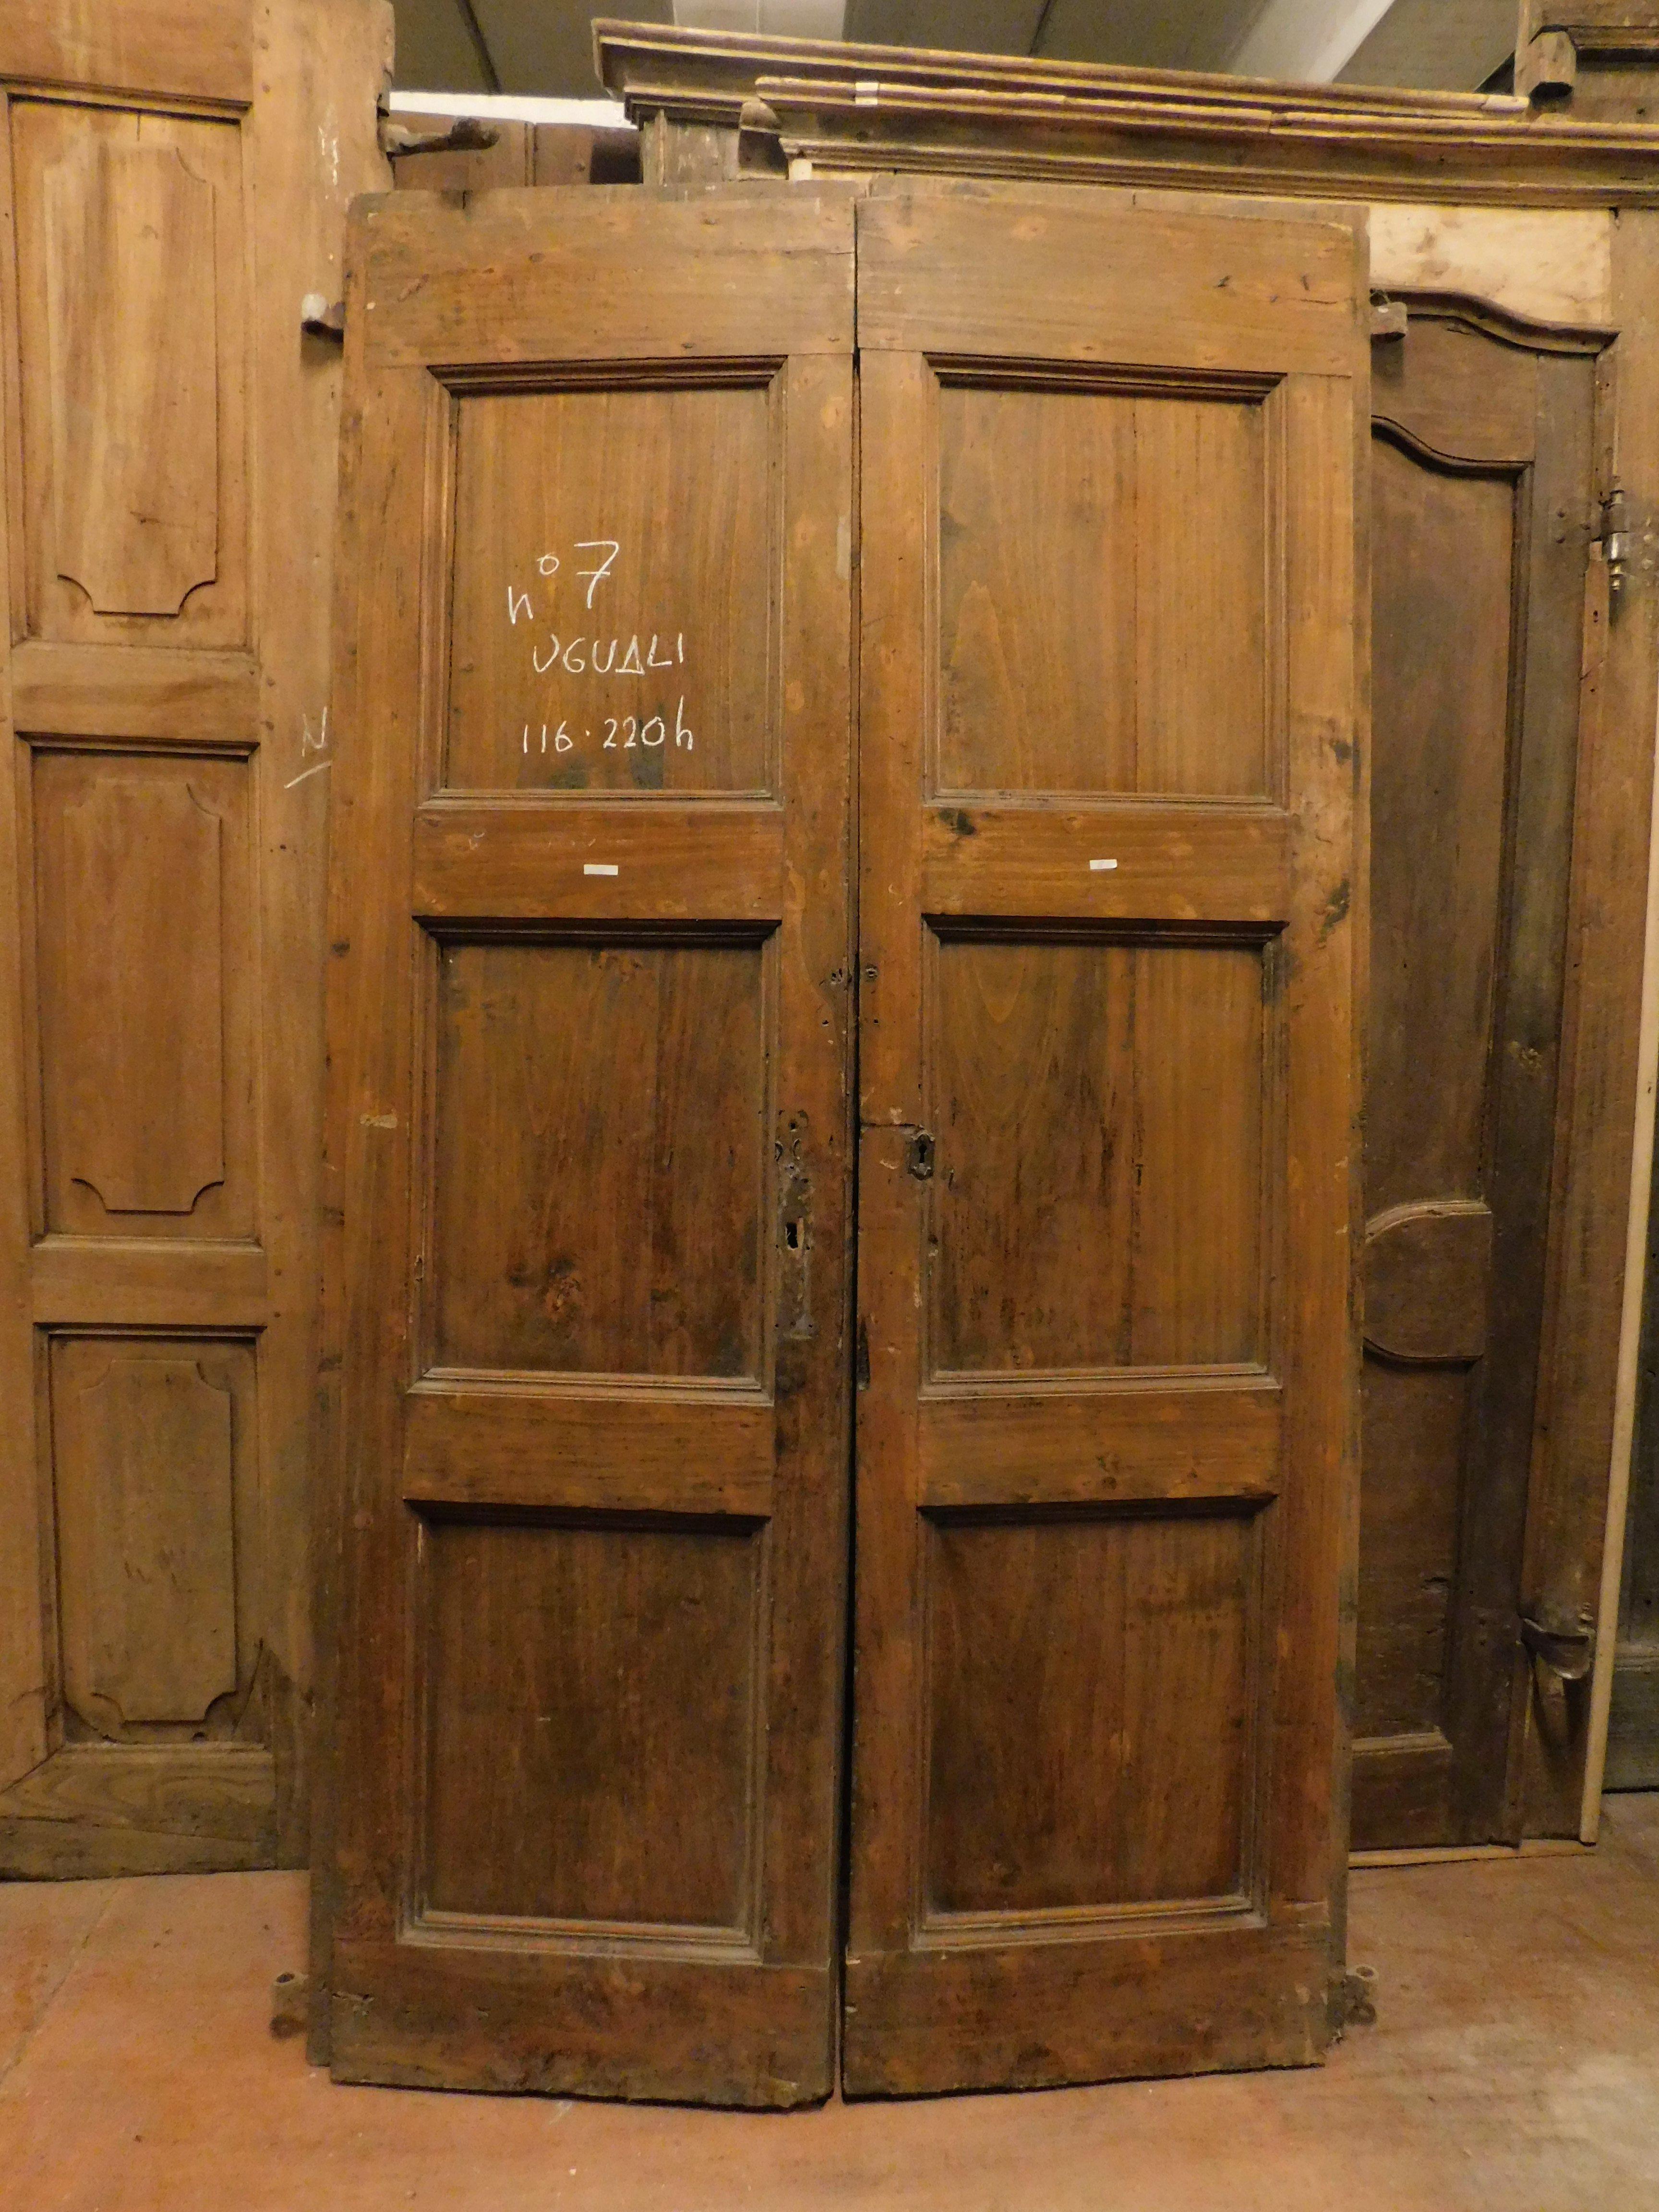 Series of 7 ancient double doors, internal doors, born in a convent in central Italy, they are all carved in solid poplar wood, of 18th century peoca.
Ideal for a hotel, bed and breakfast, place that needs several identical doors, 7 double doors are